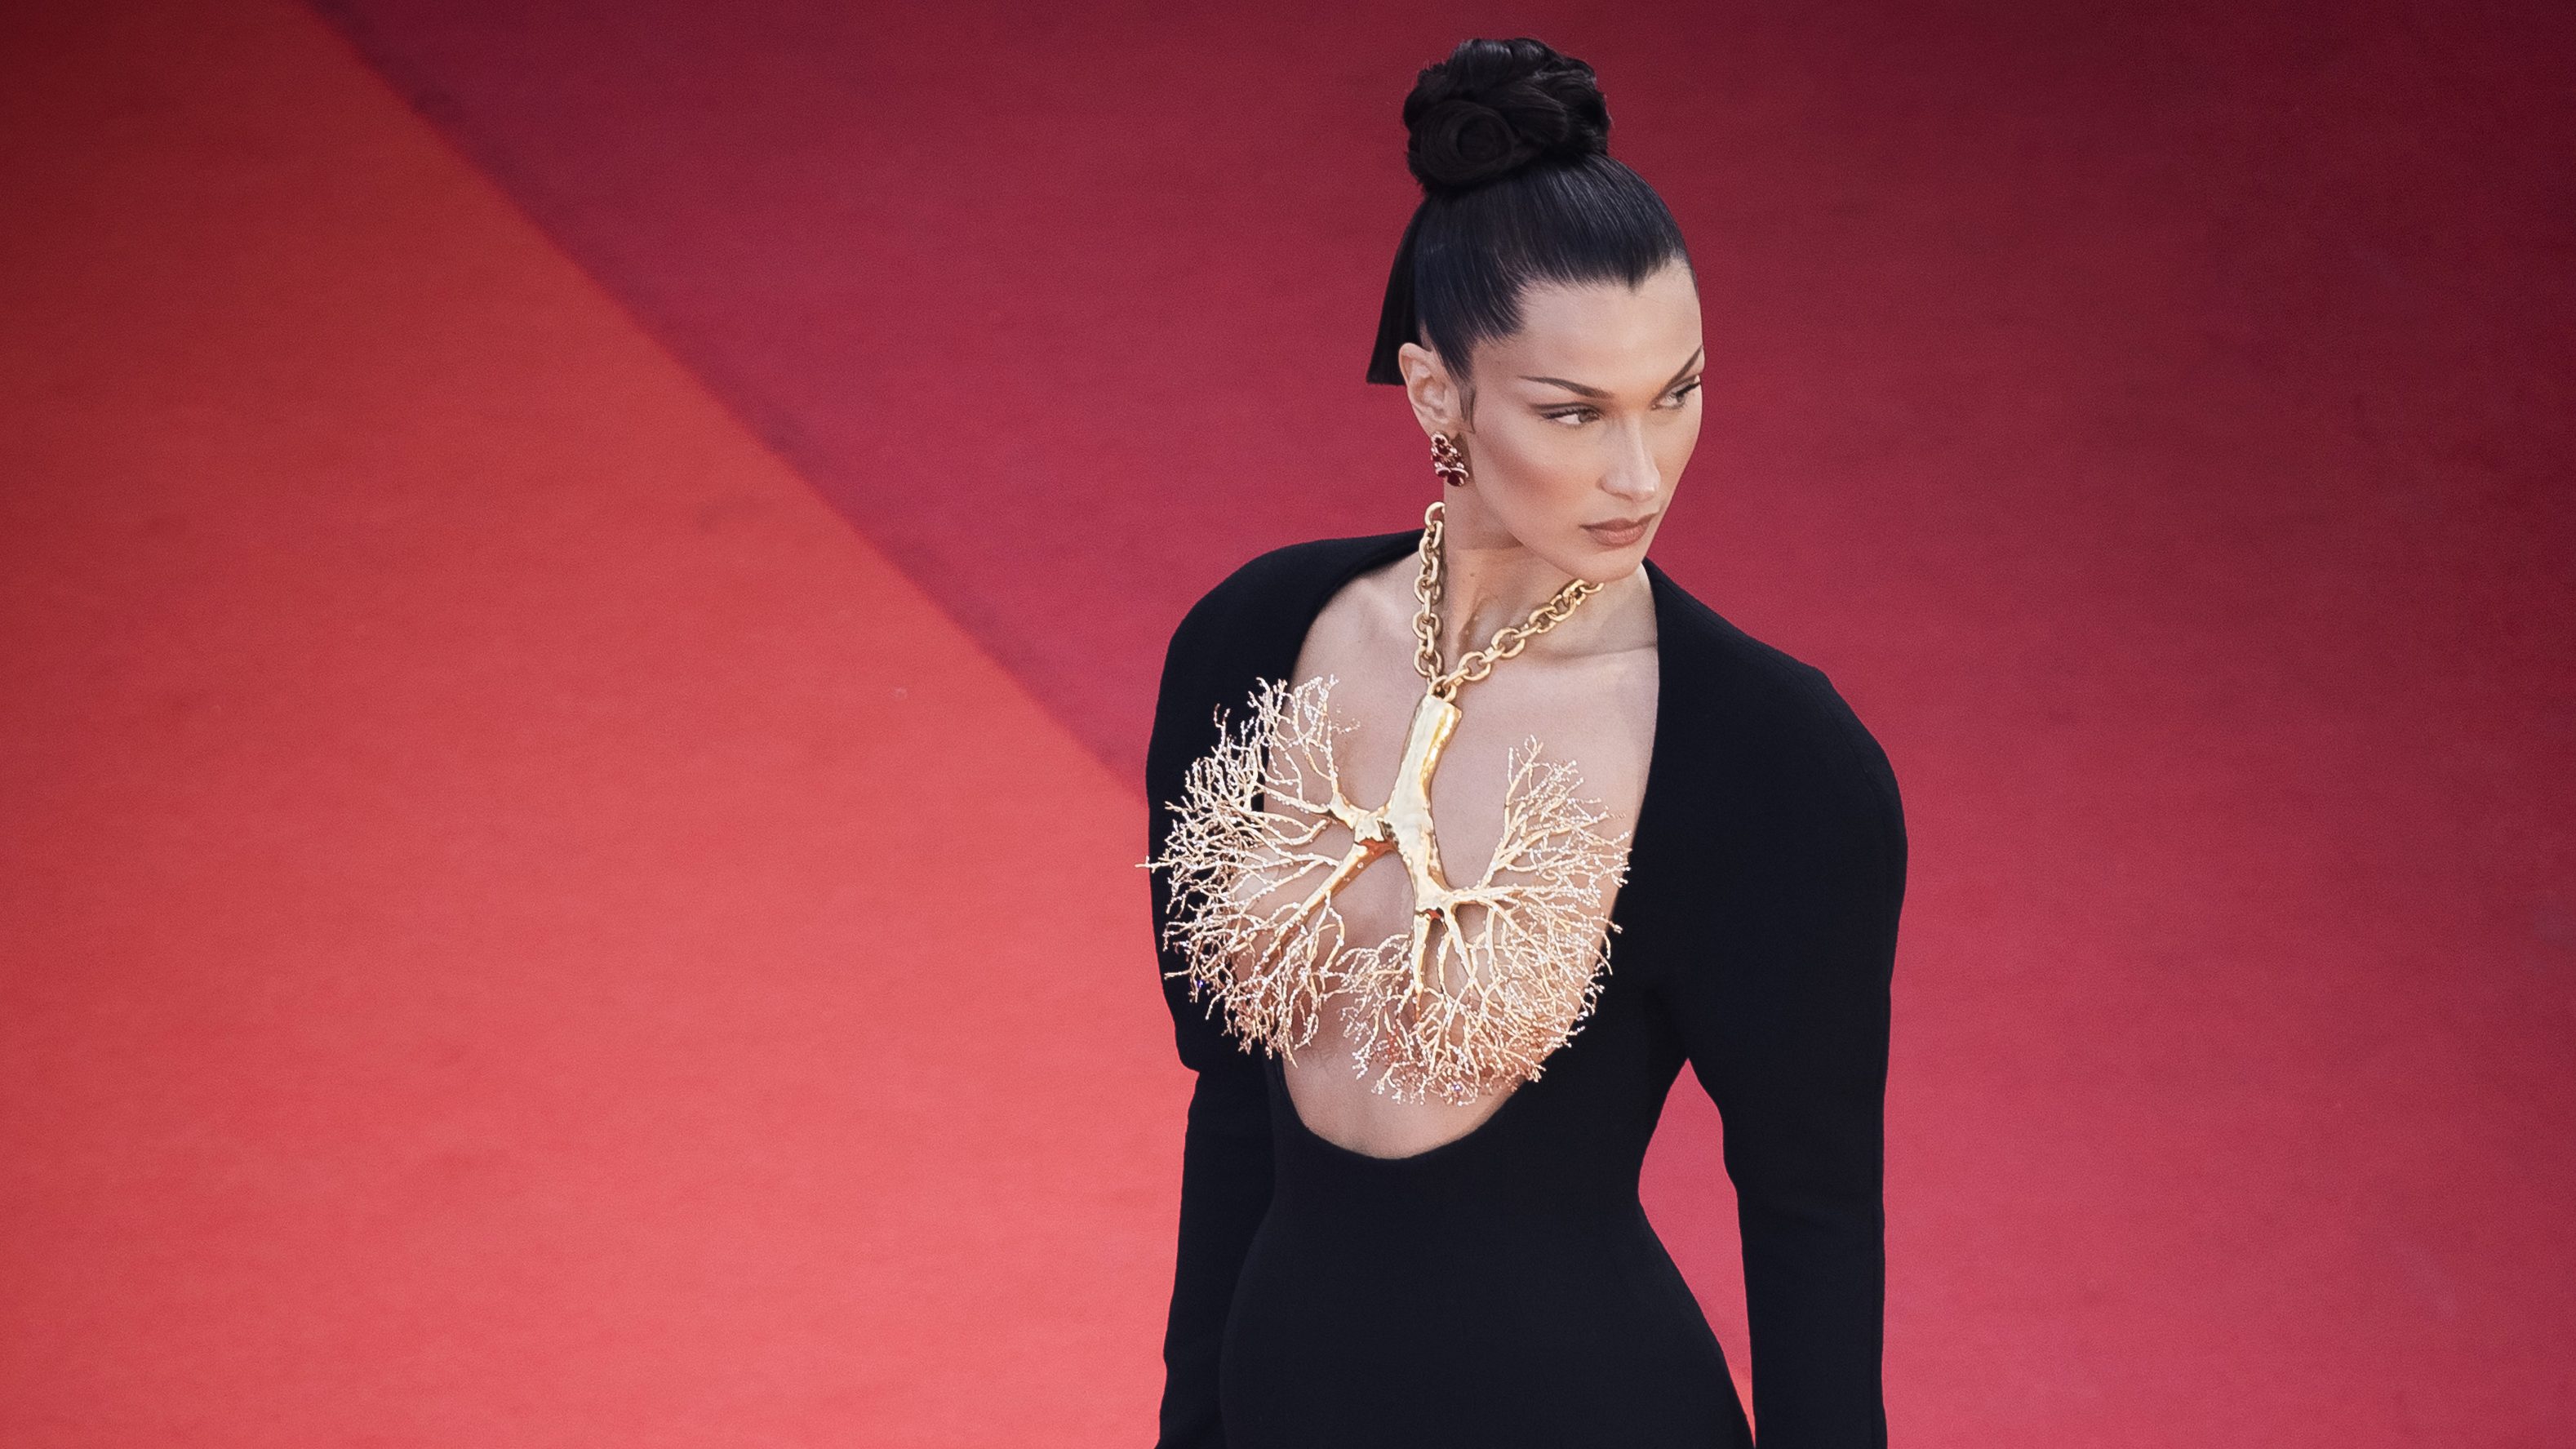 Best Cannes Film Festival Looks Through the Years